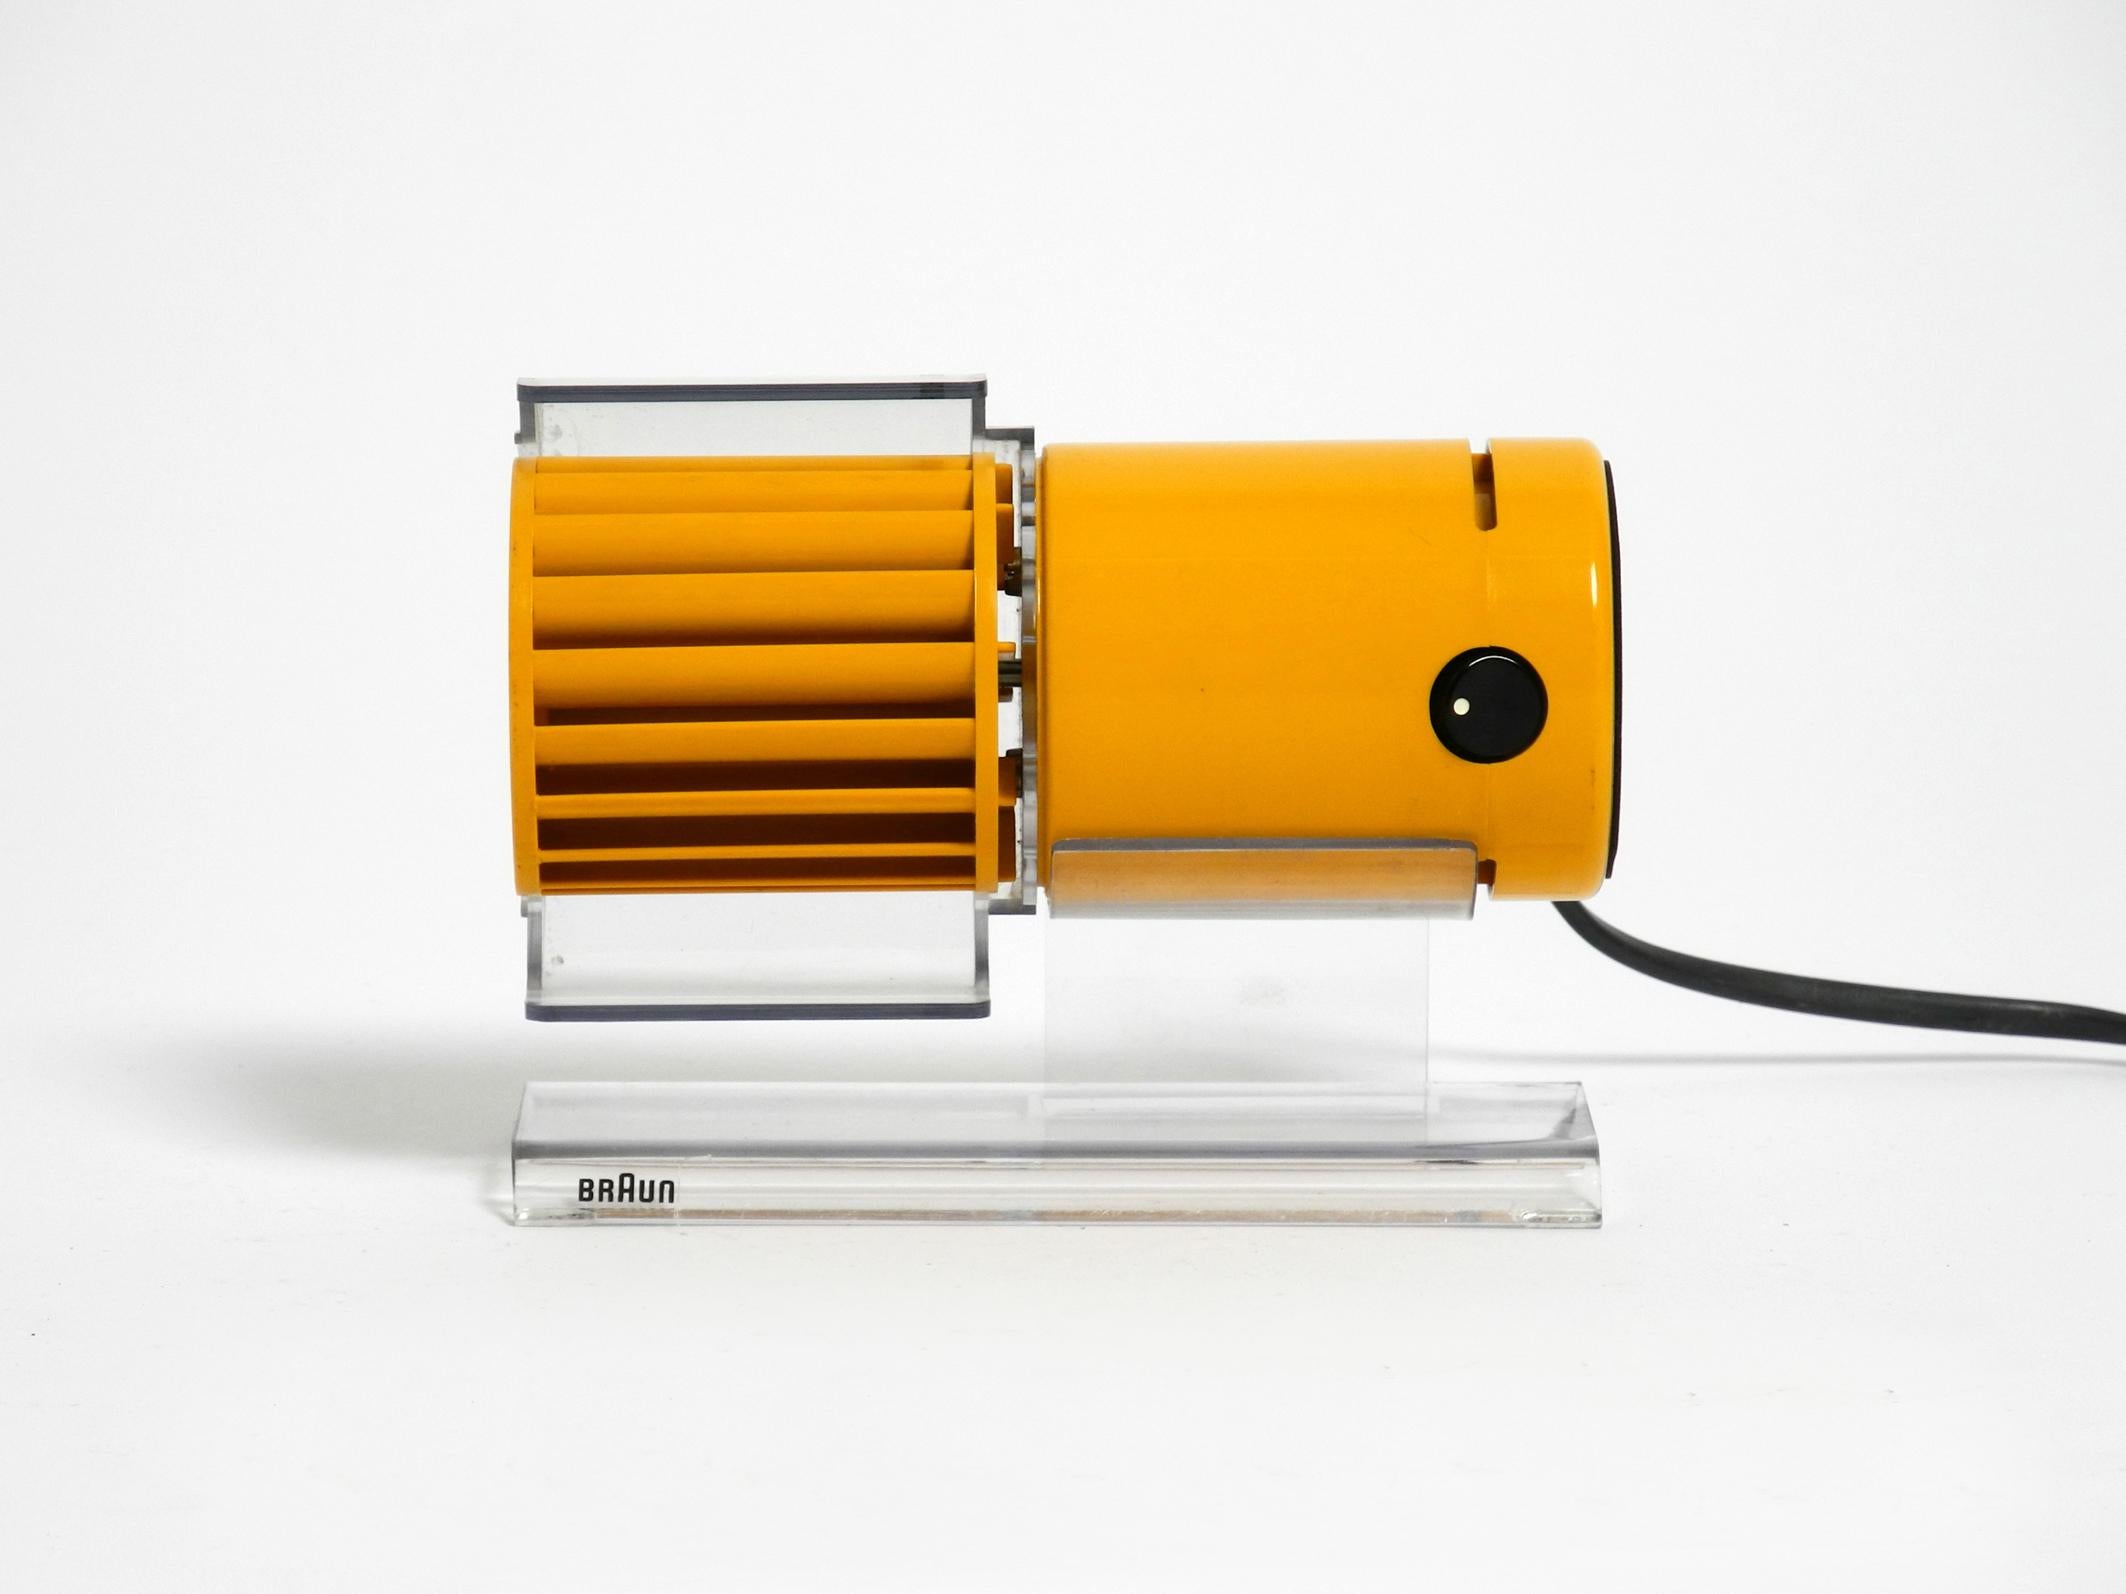 Original BRAUN table fan HL 70 from 1971 in orange yellow.
Original design of the HL1 table fan in 1960 by Reinhold Weiss.
This successor device, the HL 70, is from 1971. Design by Jürgen Greubel.
The fan roller with motor and the support are